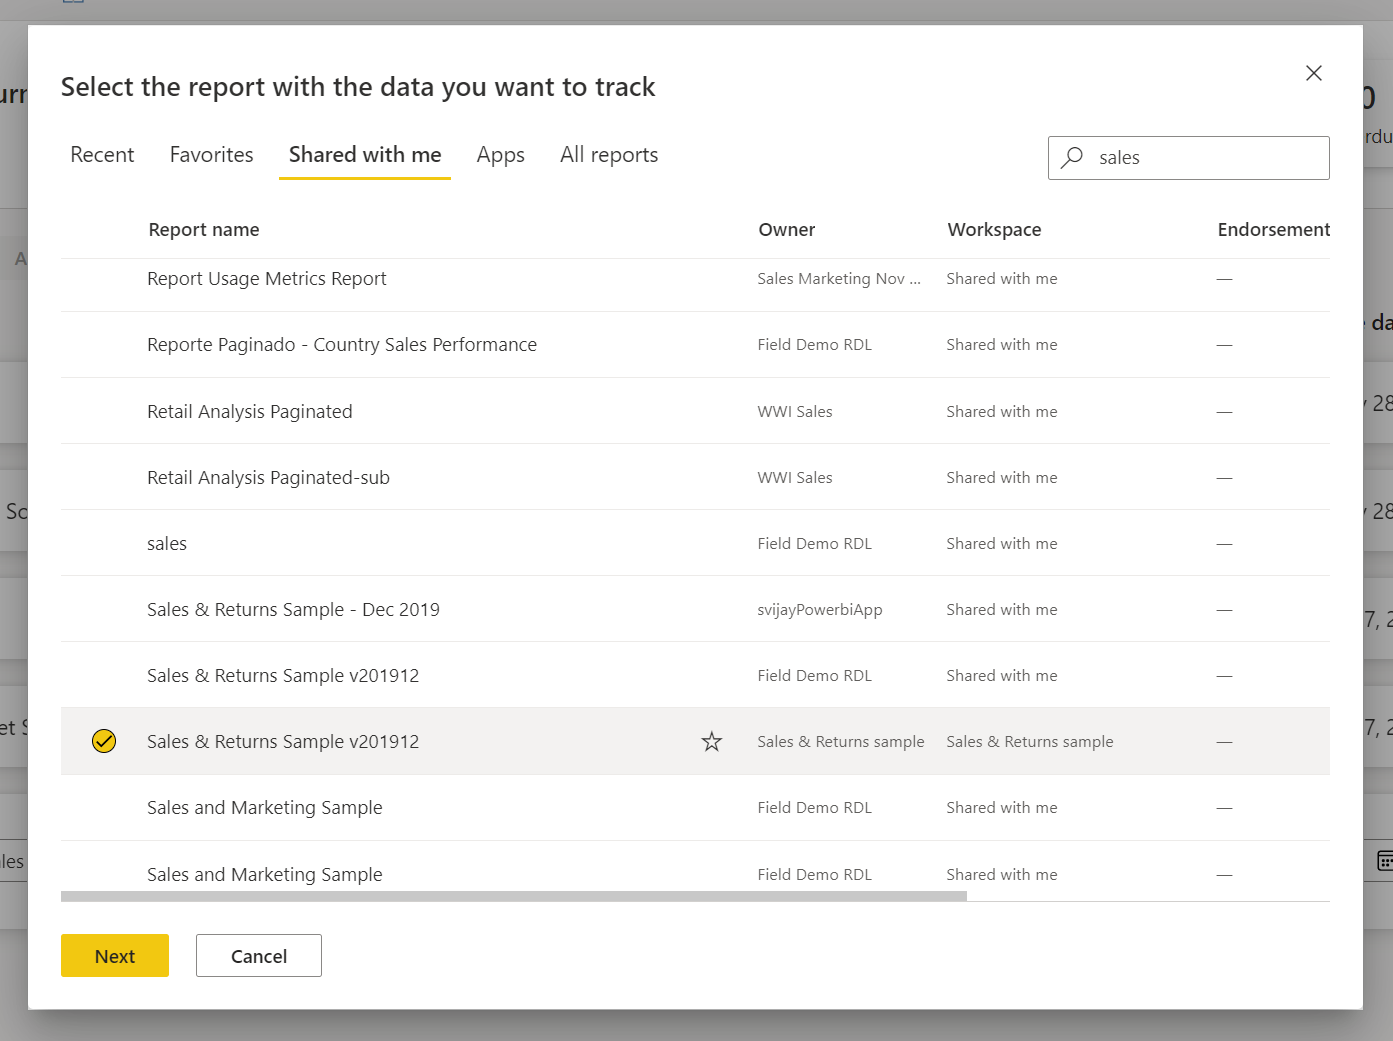 Select the report that contains the data value you want to connect to.